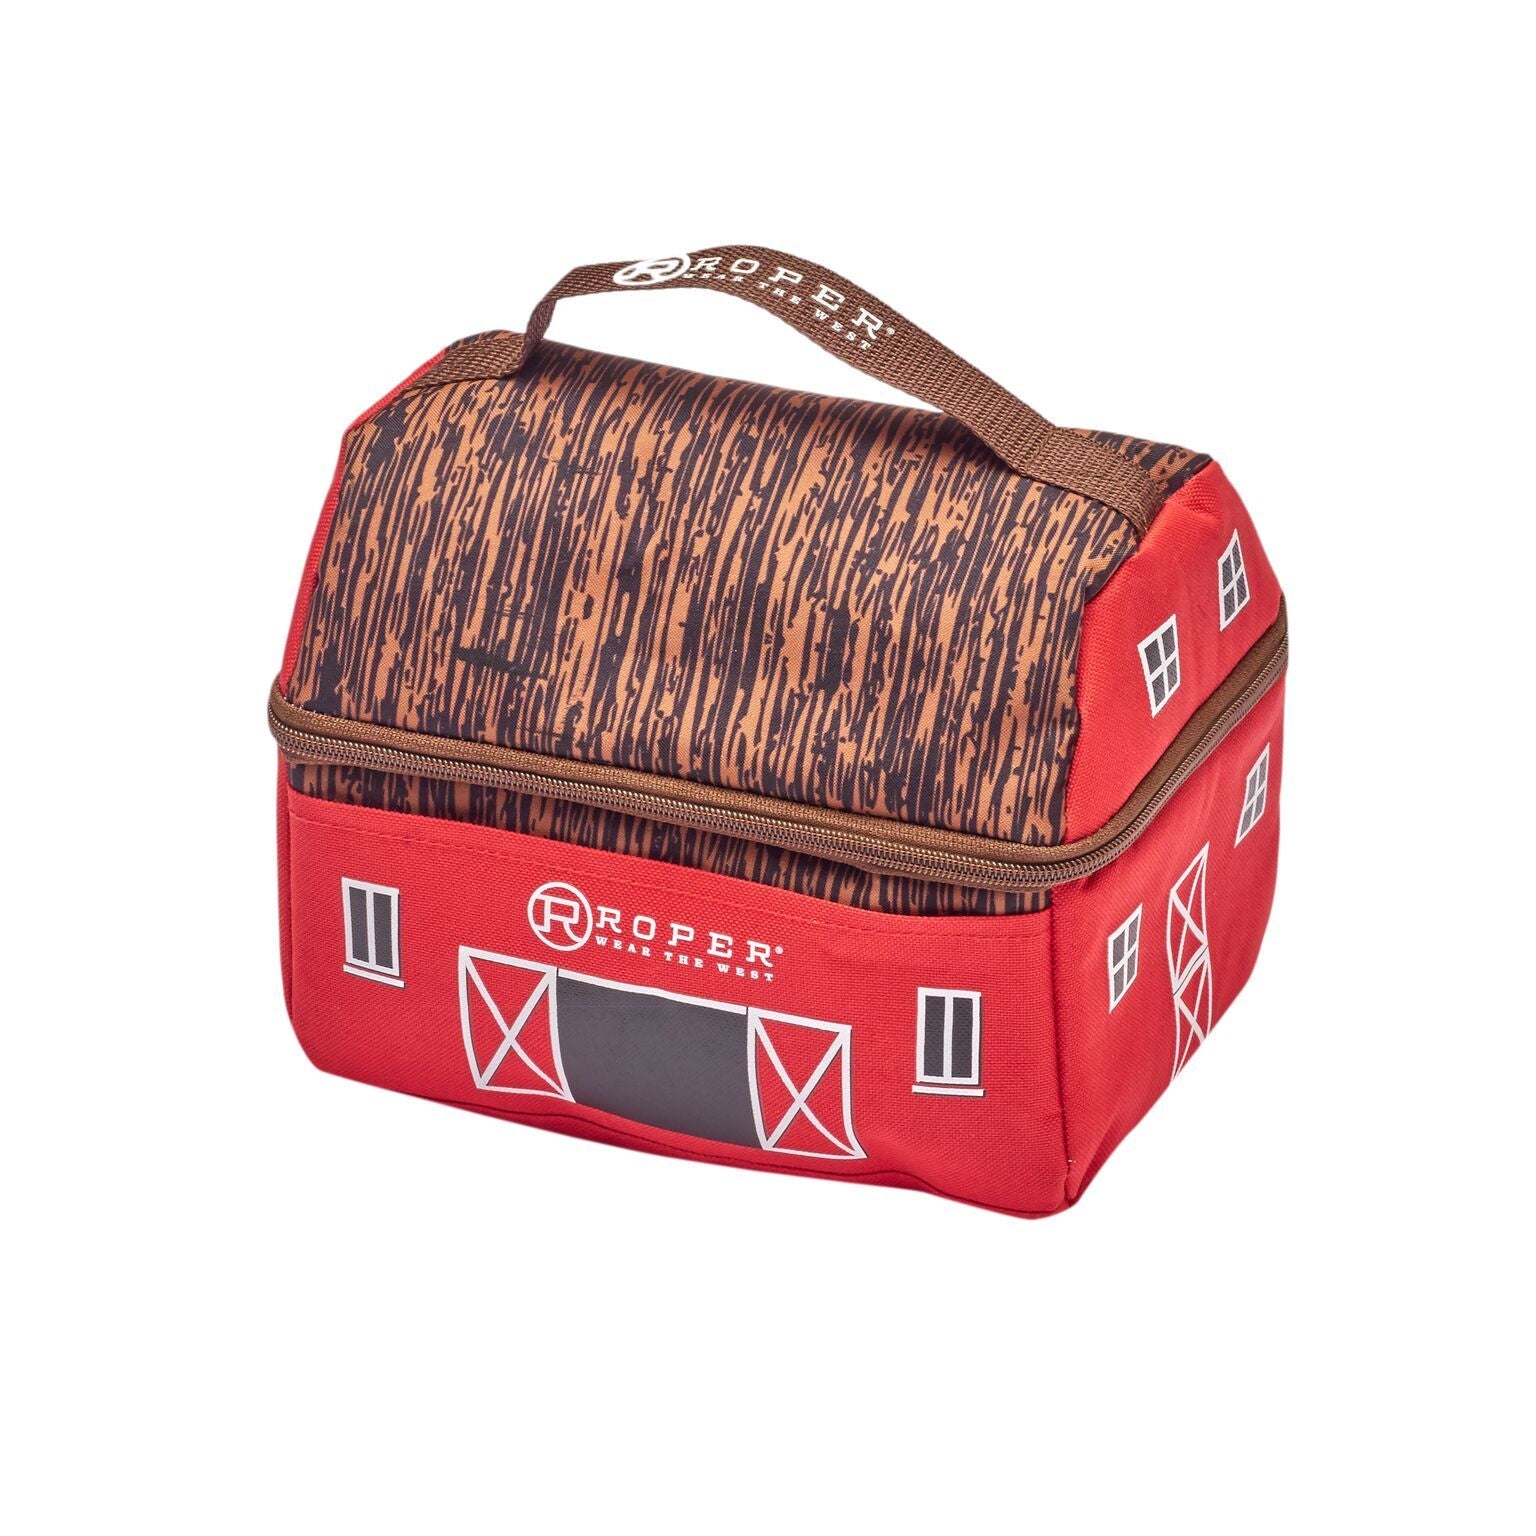 Roper Barn Lunch Boxes (6680131862605)